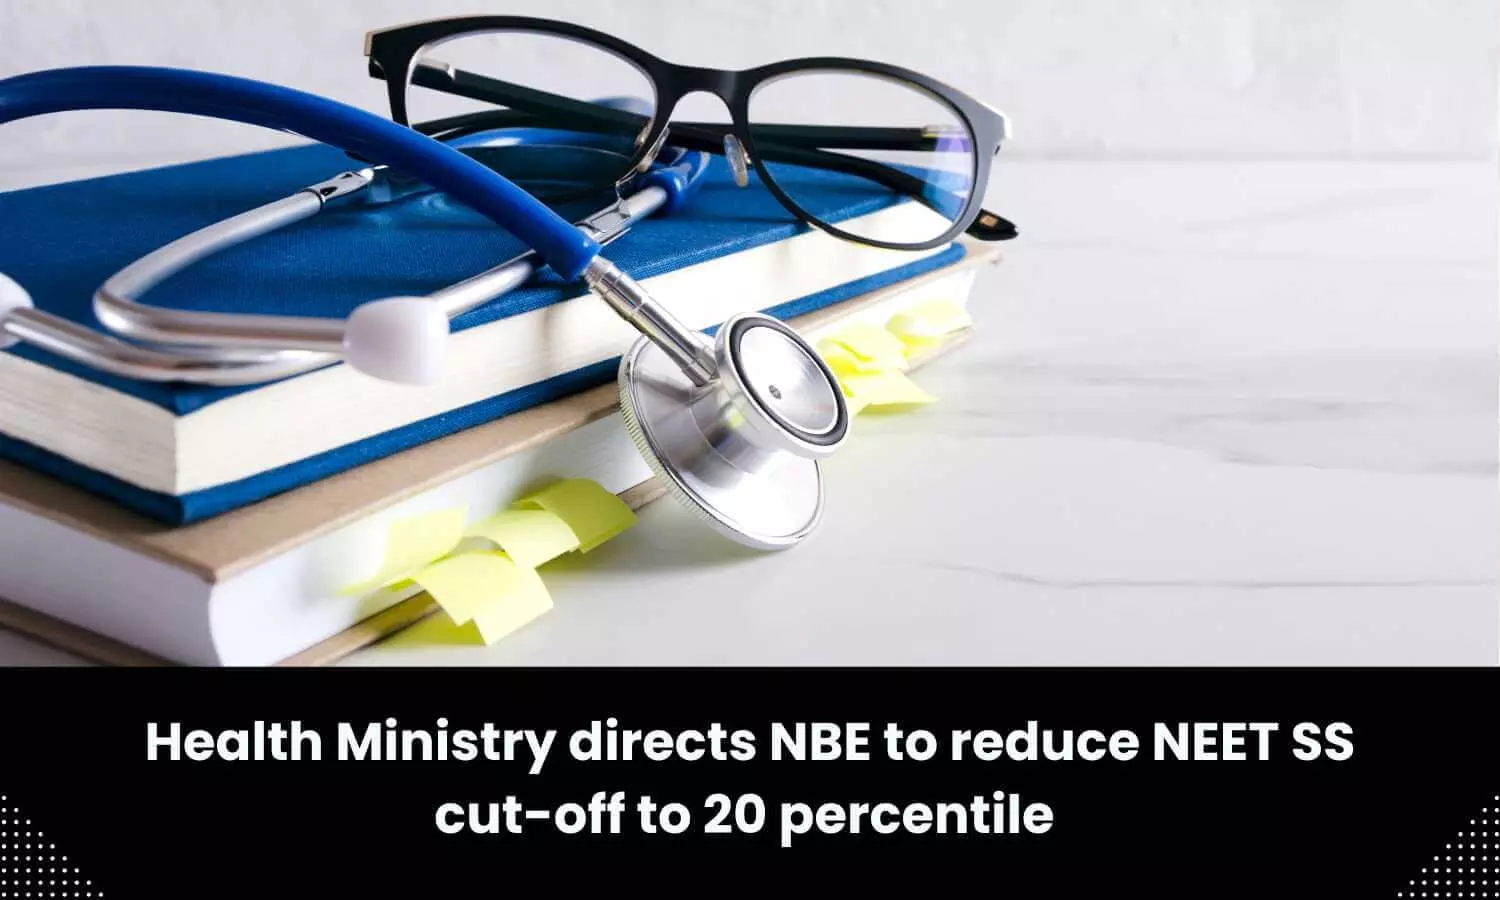 Reduce NEET SS cut-off to 20 percentile: Health Ministry directs NBE